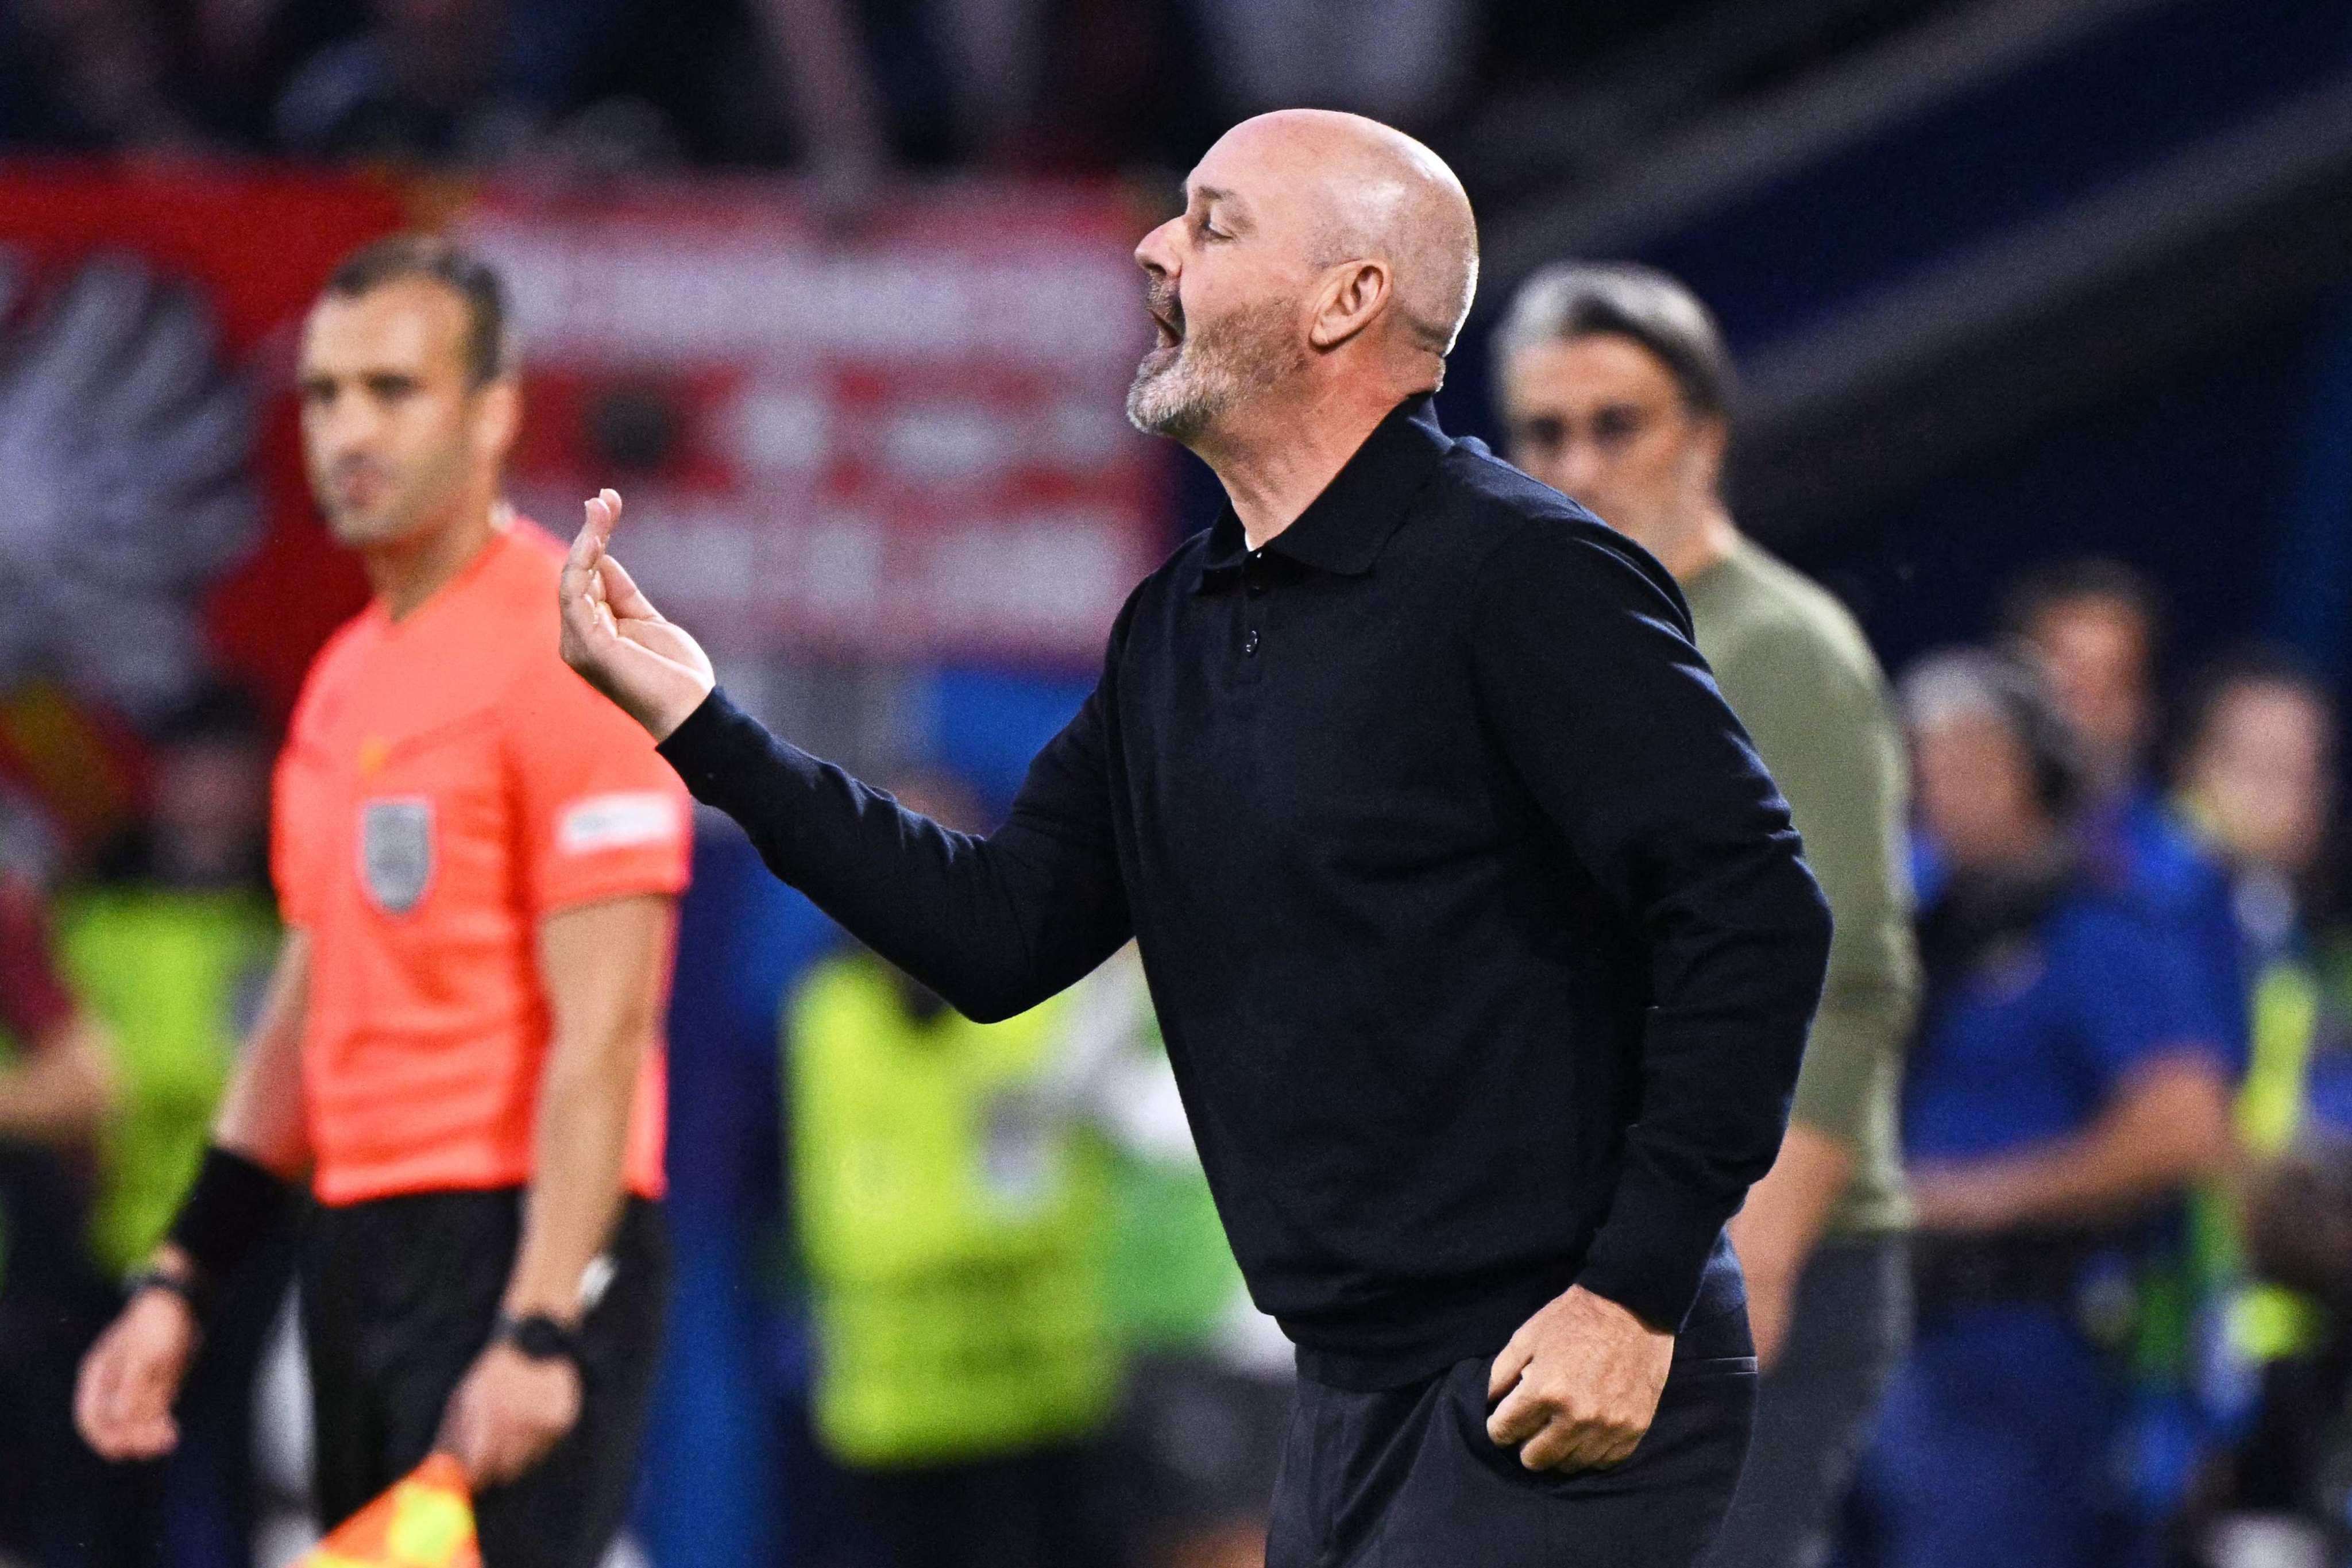 Scotland’s head coach Steve Clarke gestures during his side’s Group A game against Switzerland at the Cologne Stadium. Photo: AFP